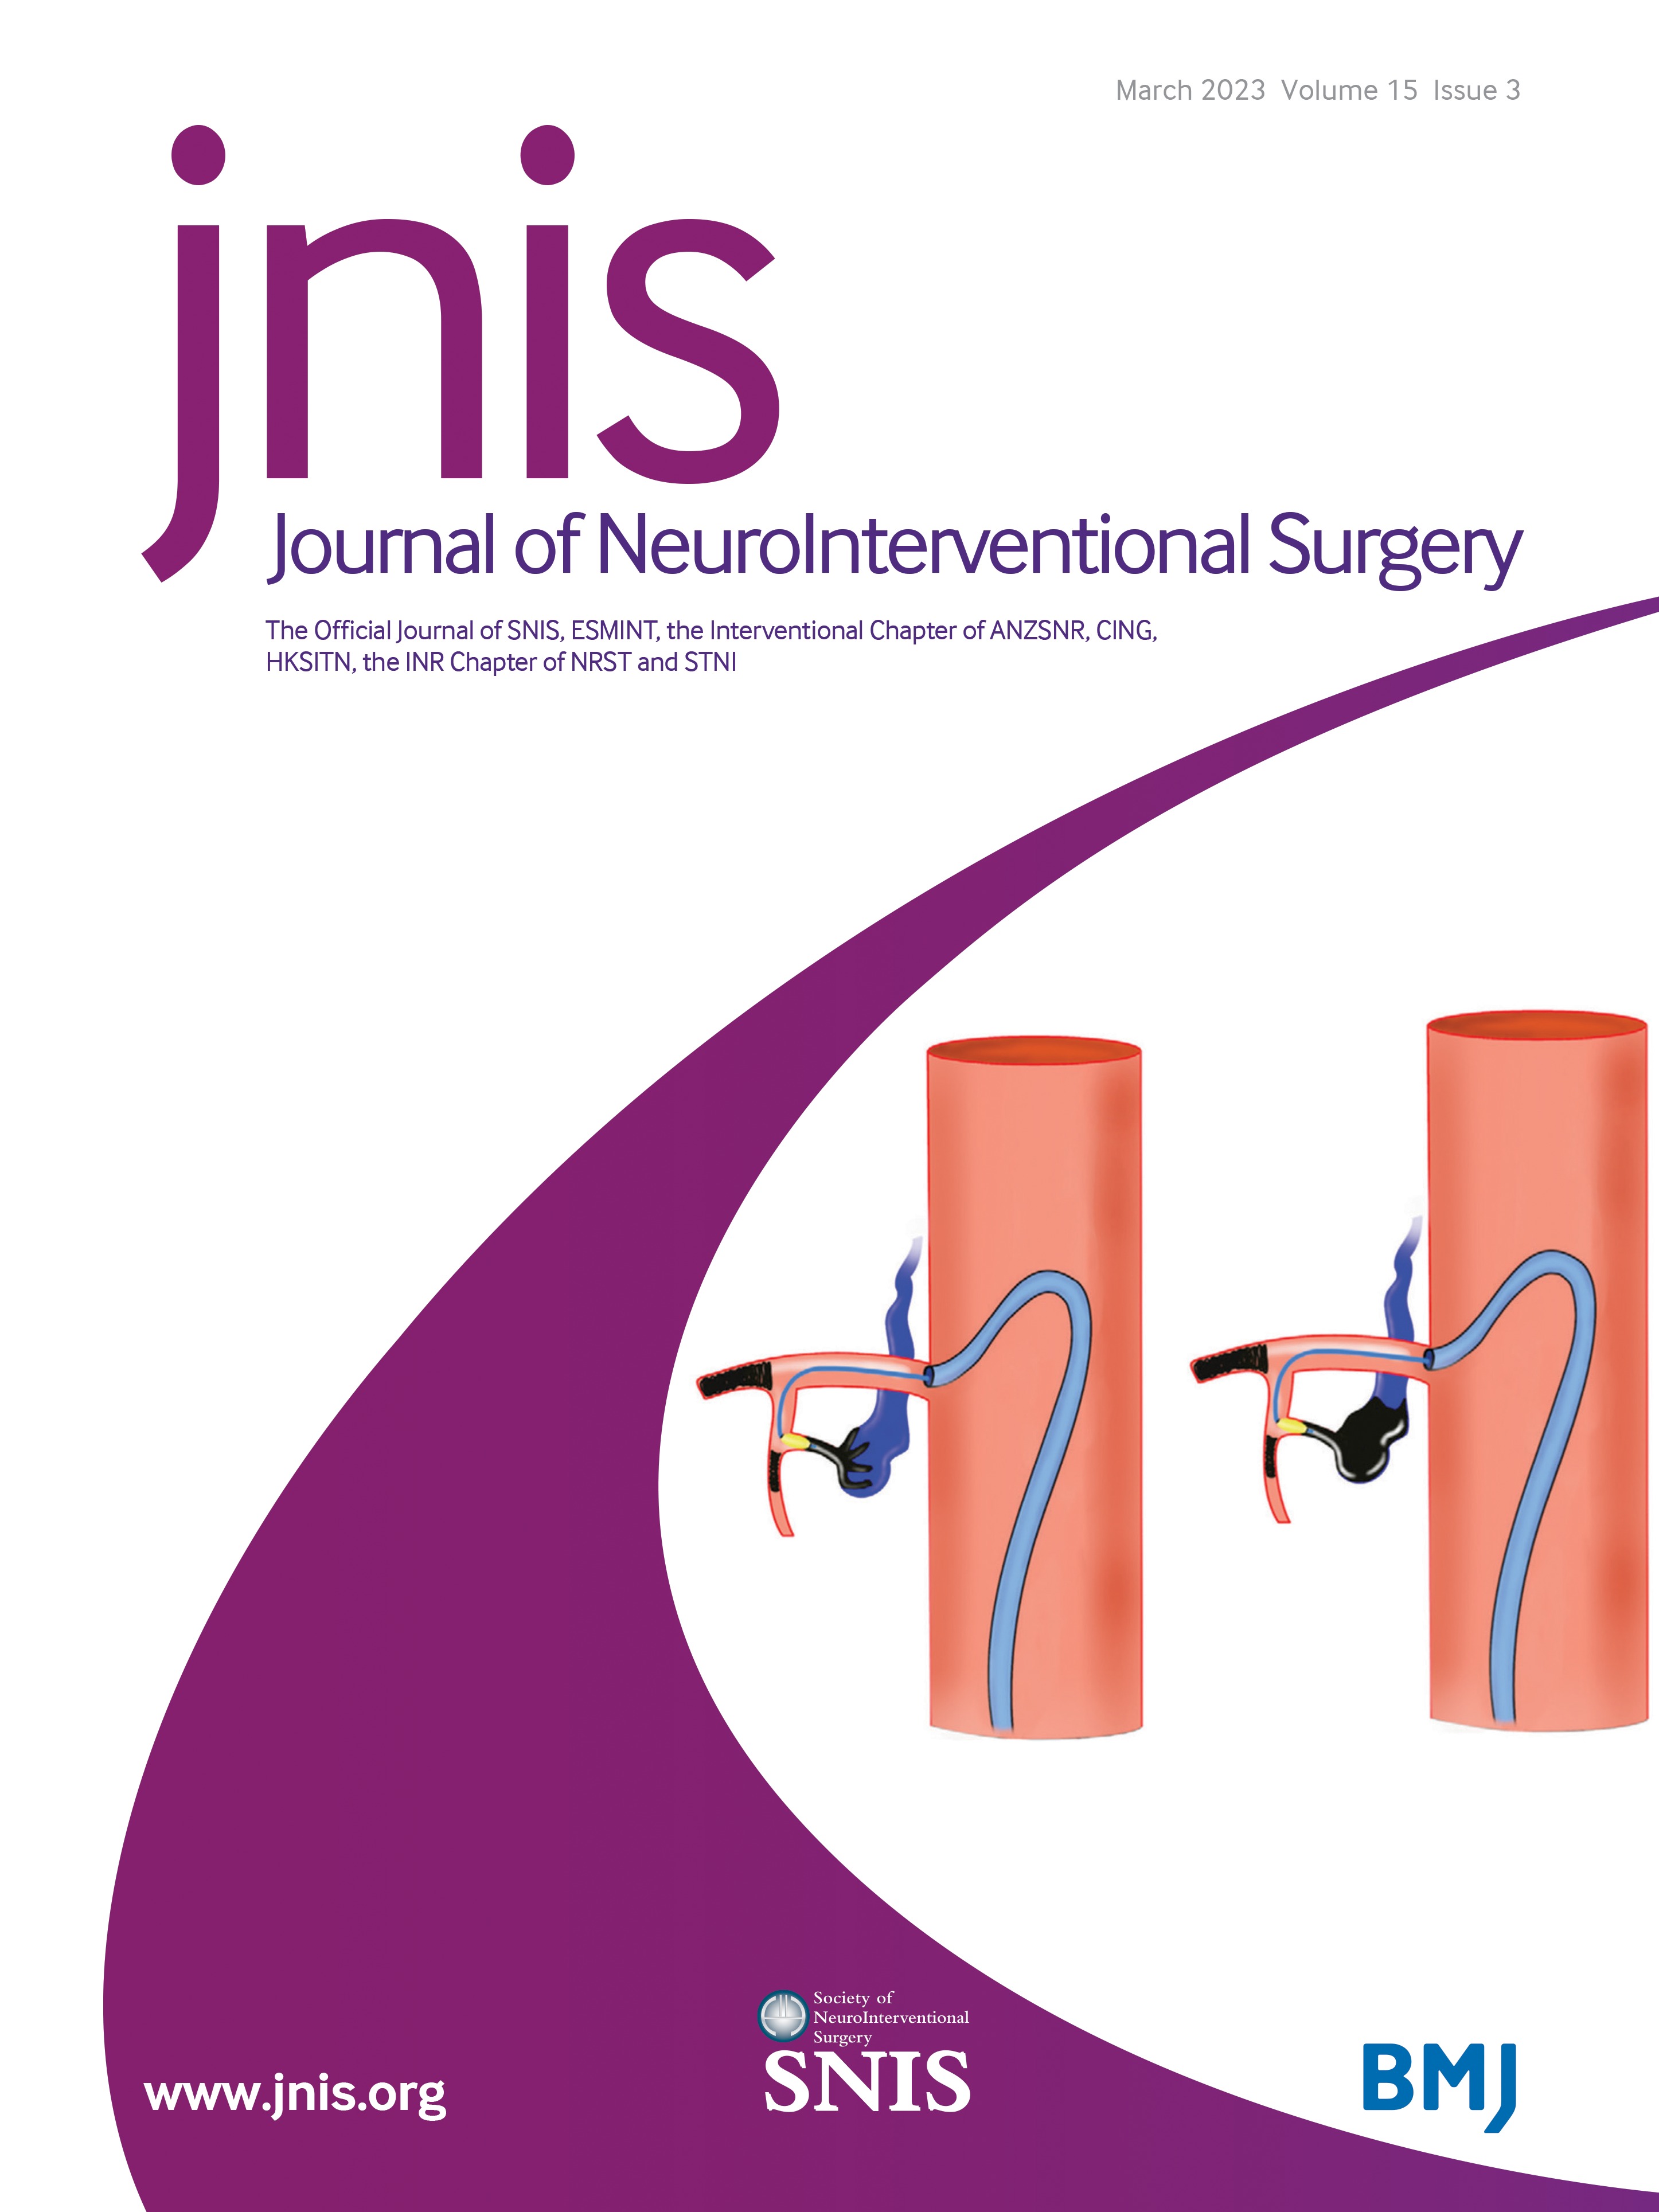 Stents for progressively symptomatic paediatric intracranial arterial dissection